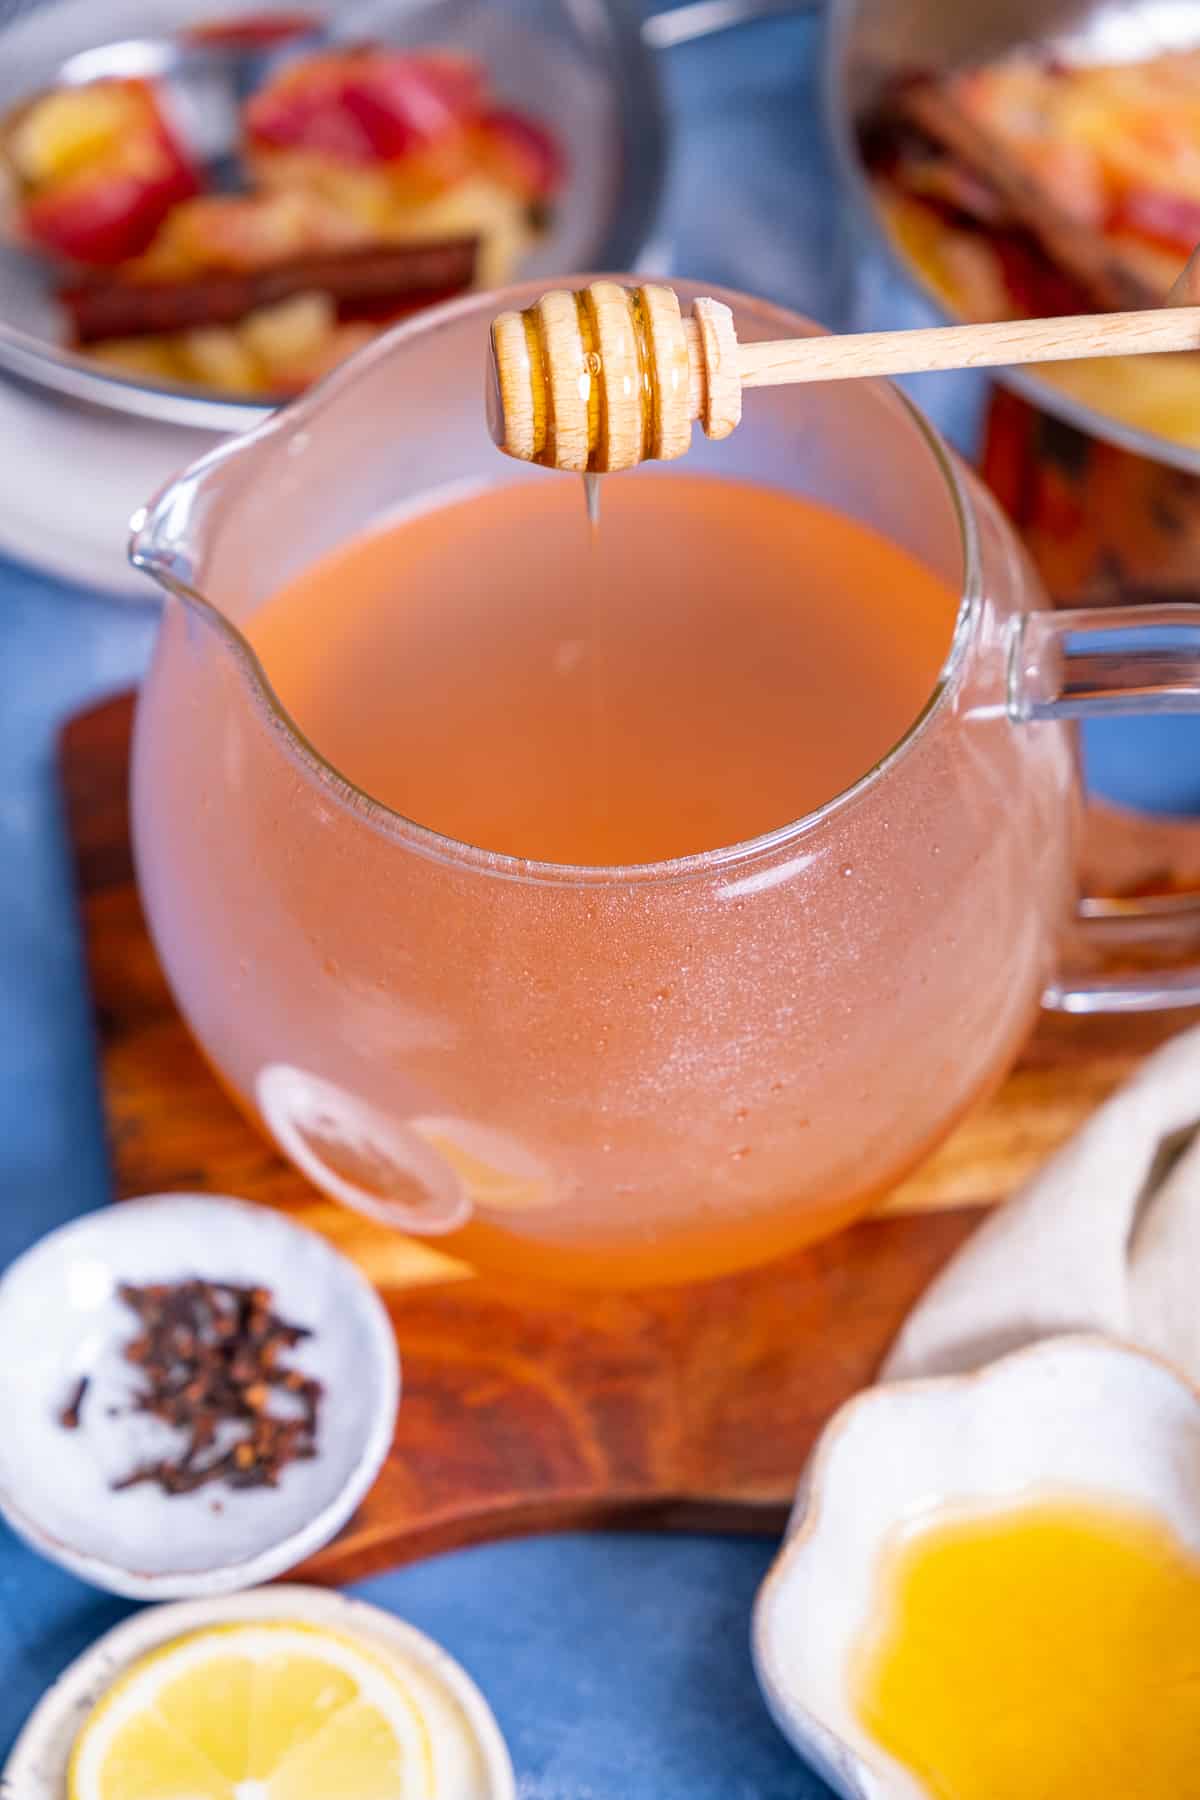 Honey is being added into the apple tea in a glass teapot.